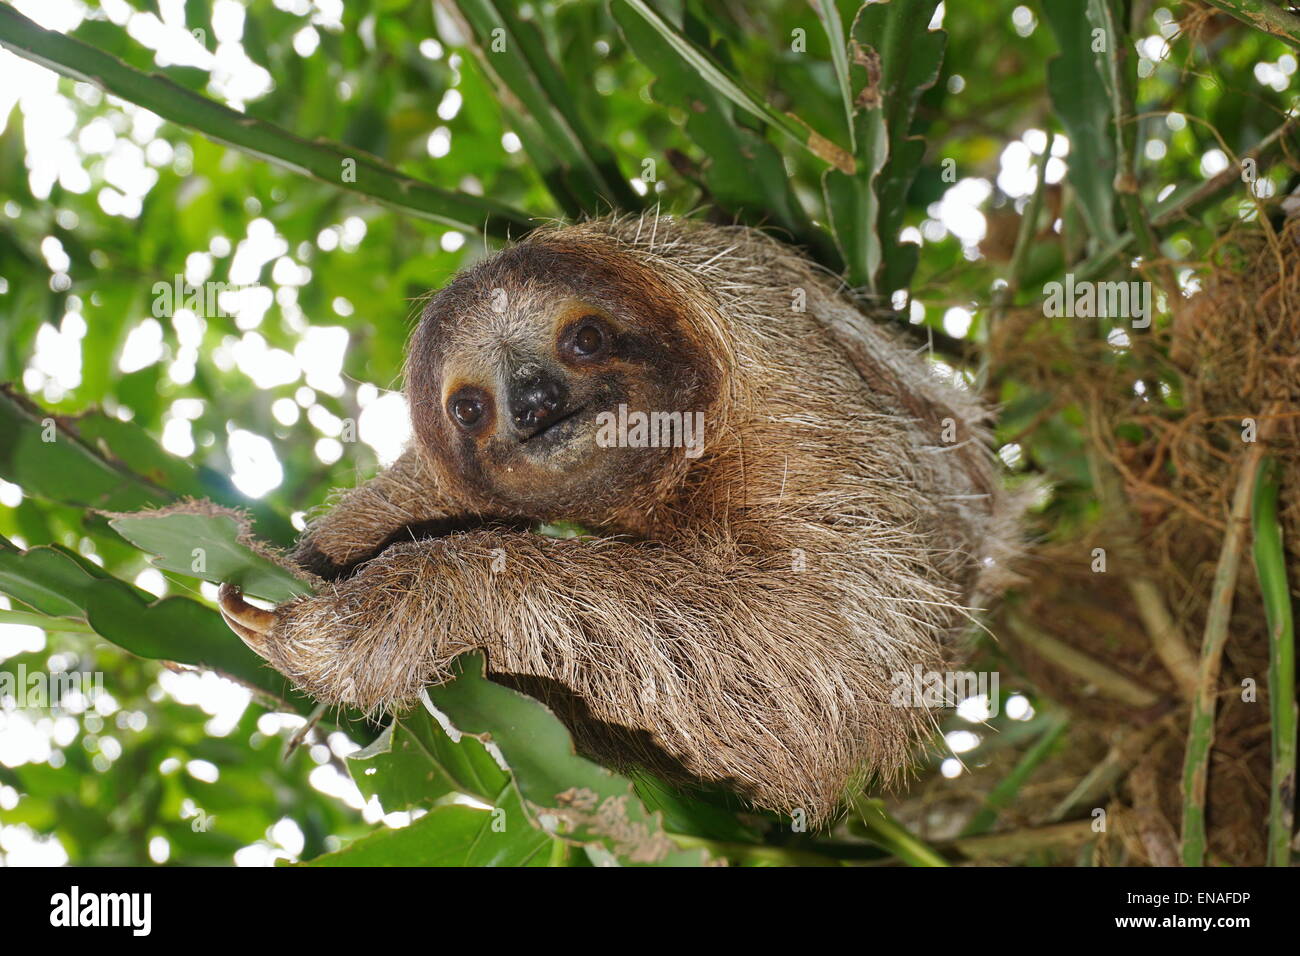 Three-toed sloth looking at camera in the jungle, wild animal, Costa Rica, Central America Stock Photo